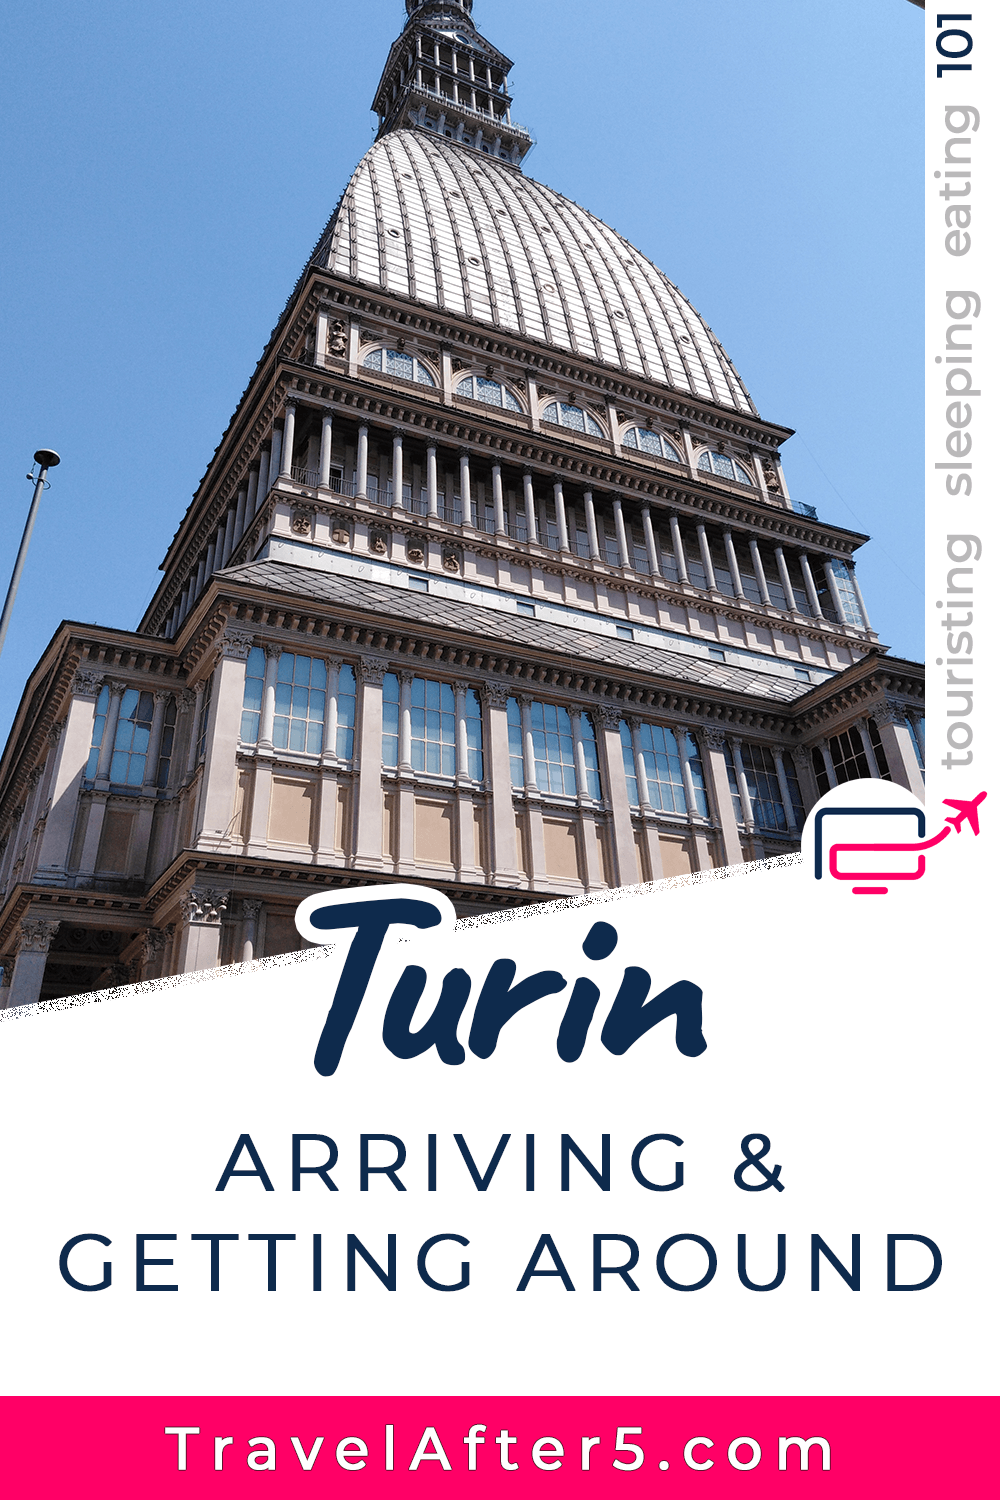 Pinterest Pin to Turin 101, Arriving & Getting Around, by Travel After 5